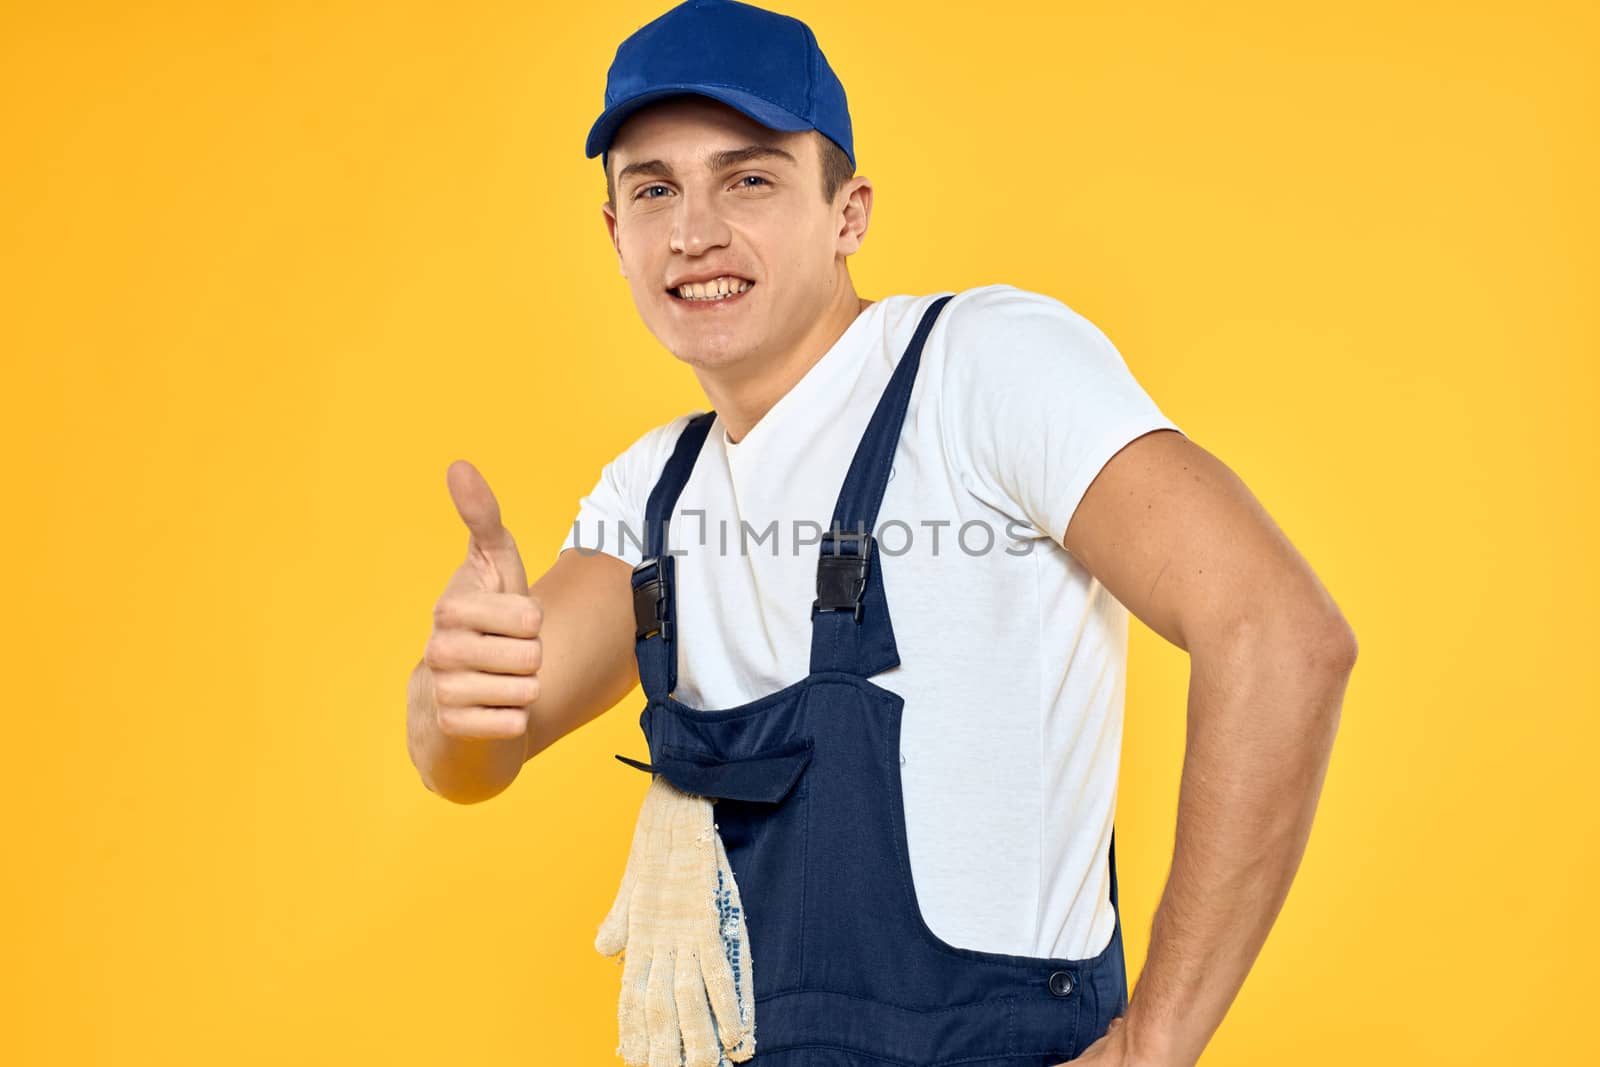 Man in working uniform emotions rendering service delivery service yellow background. High quality photo